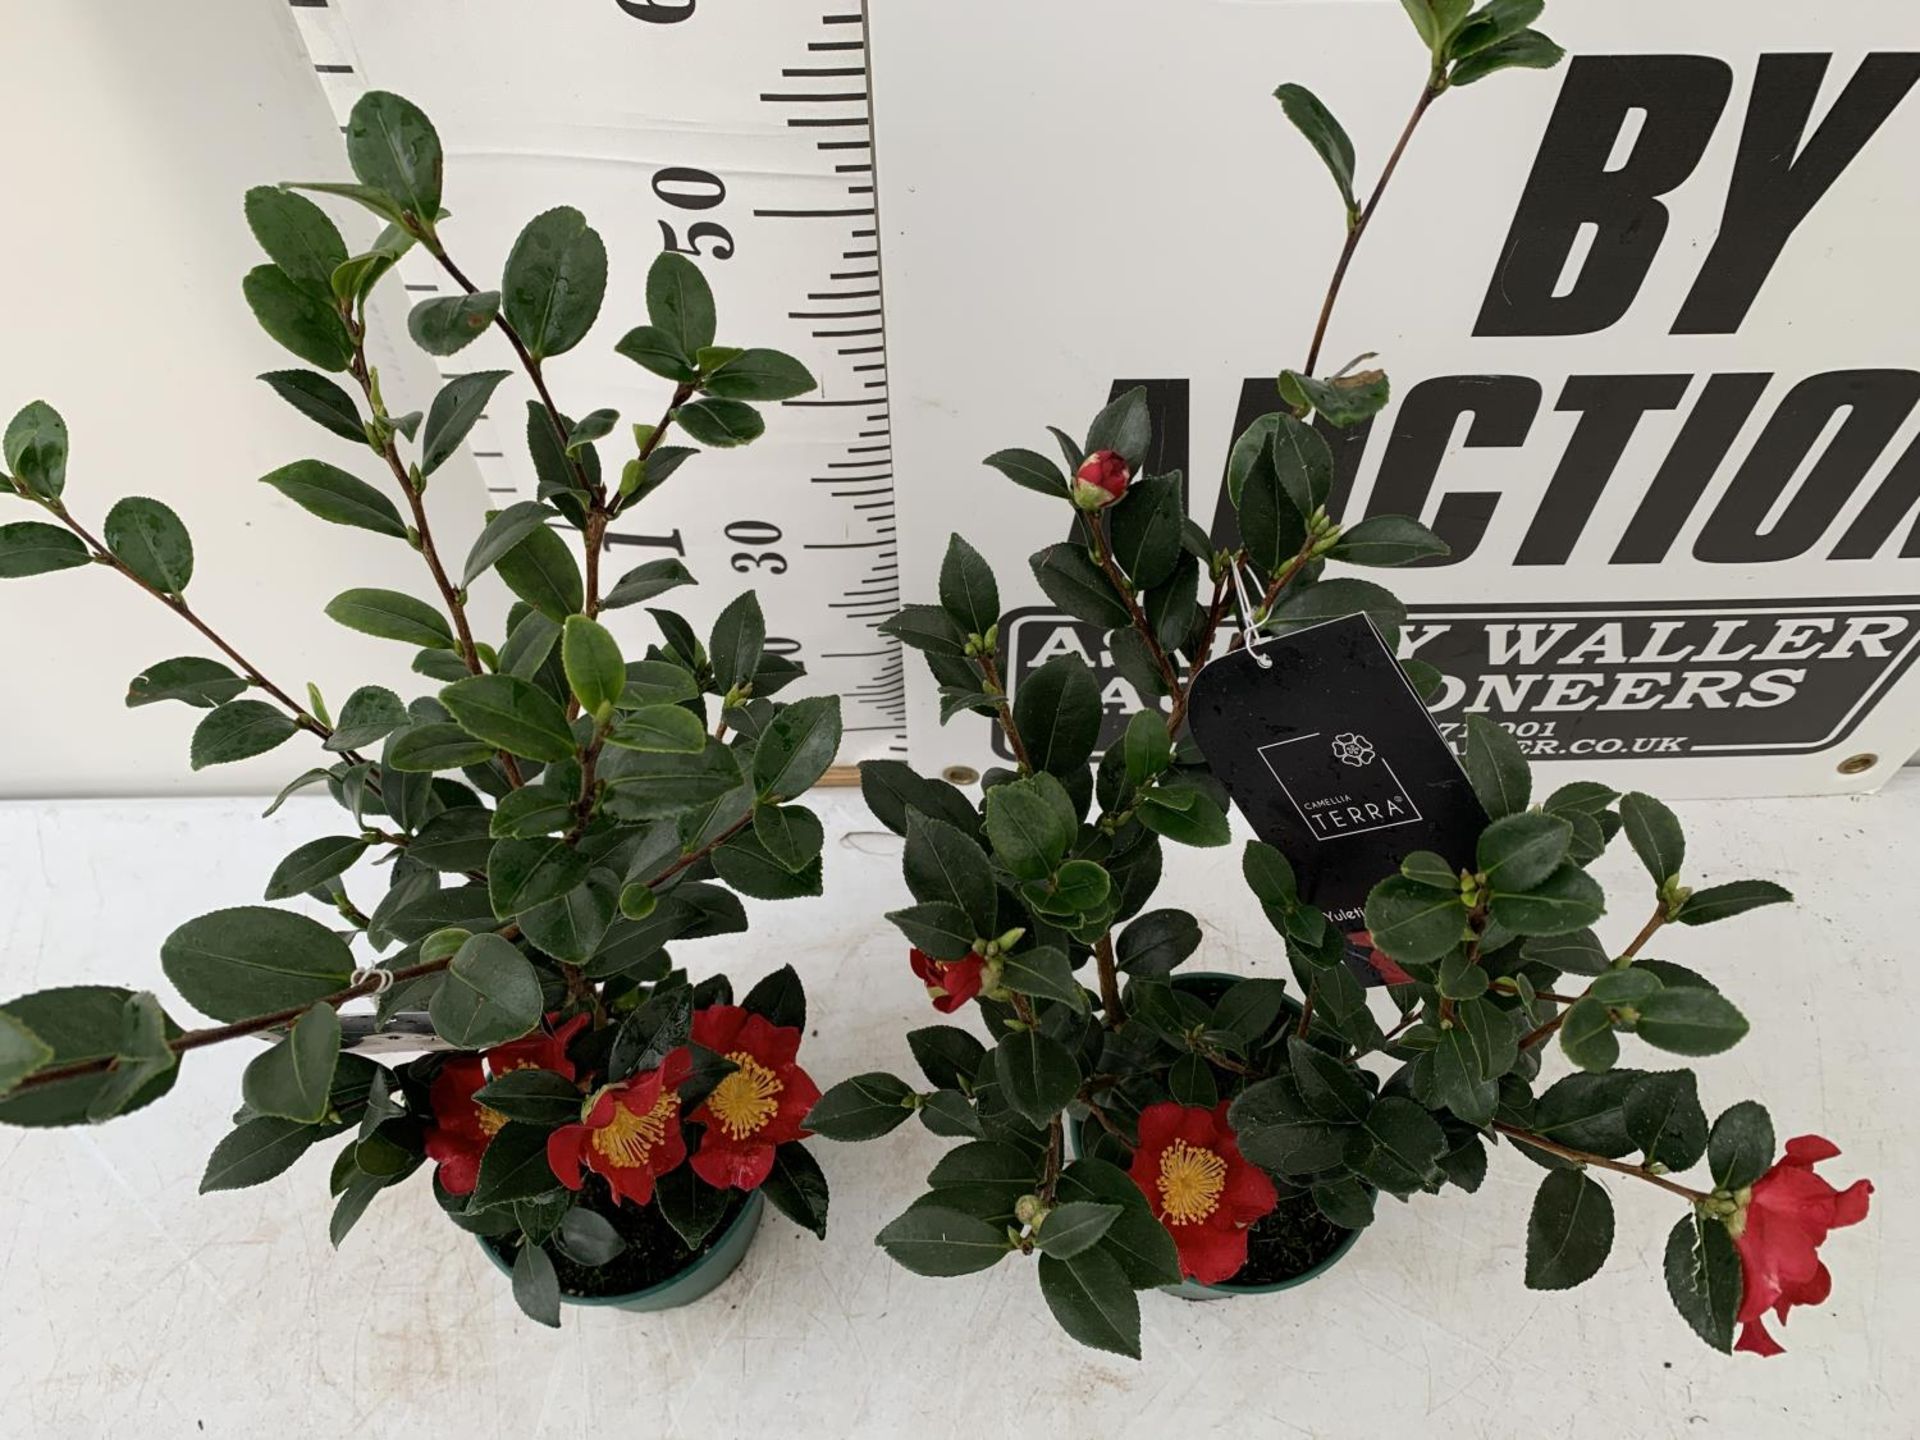 TWO CAMELLIA TERRA PLANTS 'YULETIDE' APPROX 70CM IN HEIGHT IN 1.5 LTR POTS PLUS VAT TO BE SOLD FOR - Image 3 of 5